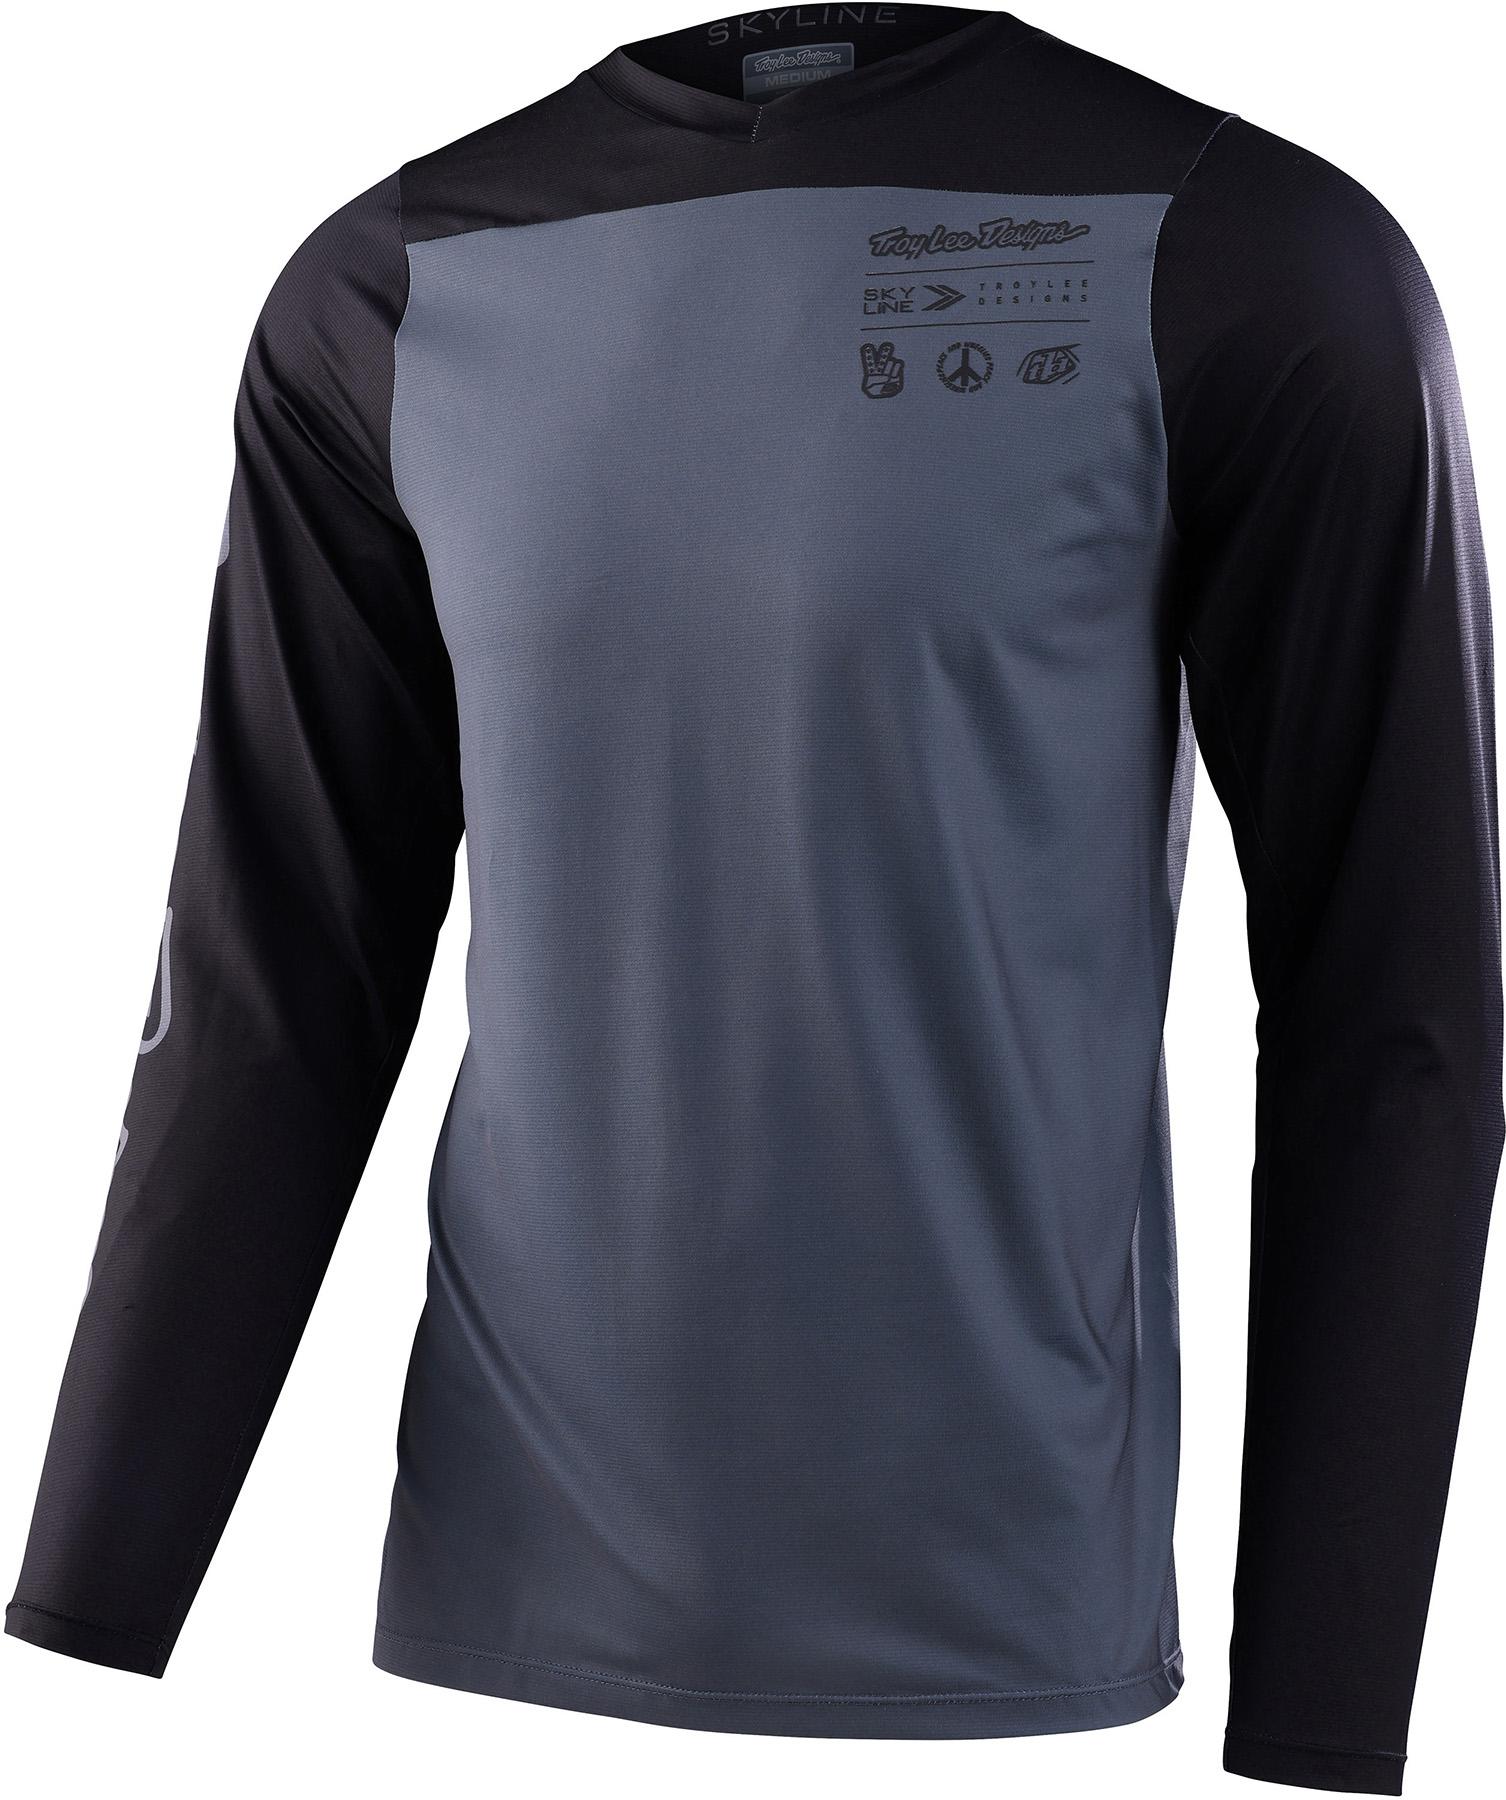 Troy Lee Designs Skyline Ls Mono Mtb Cycling Jersey - Charcoal